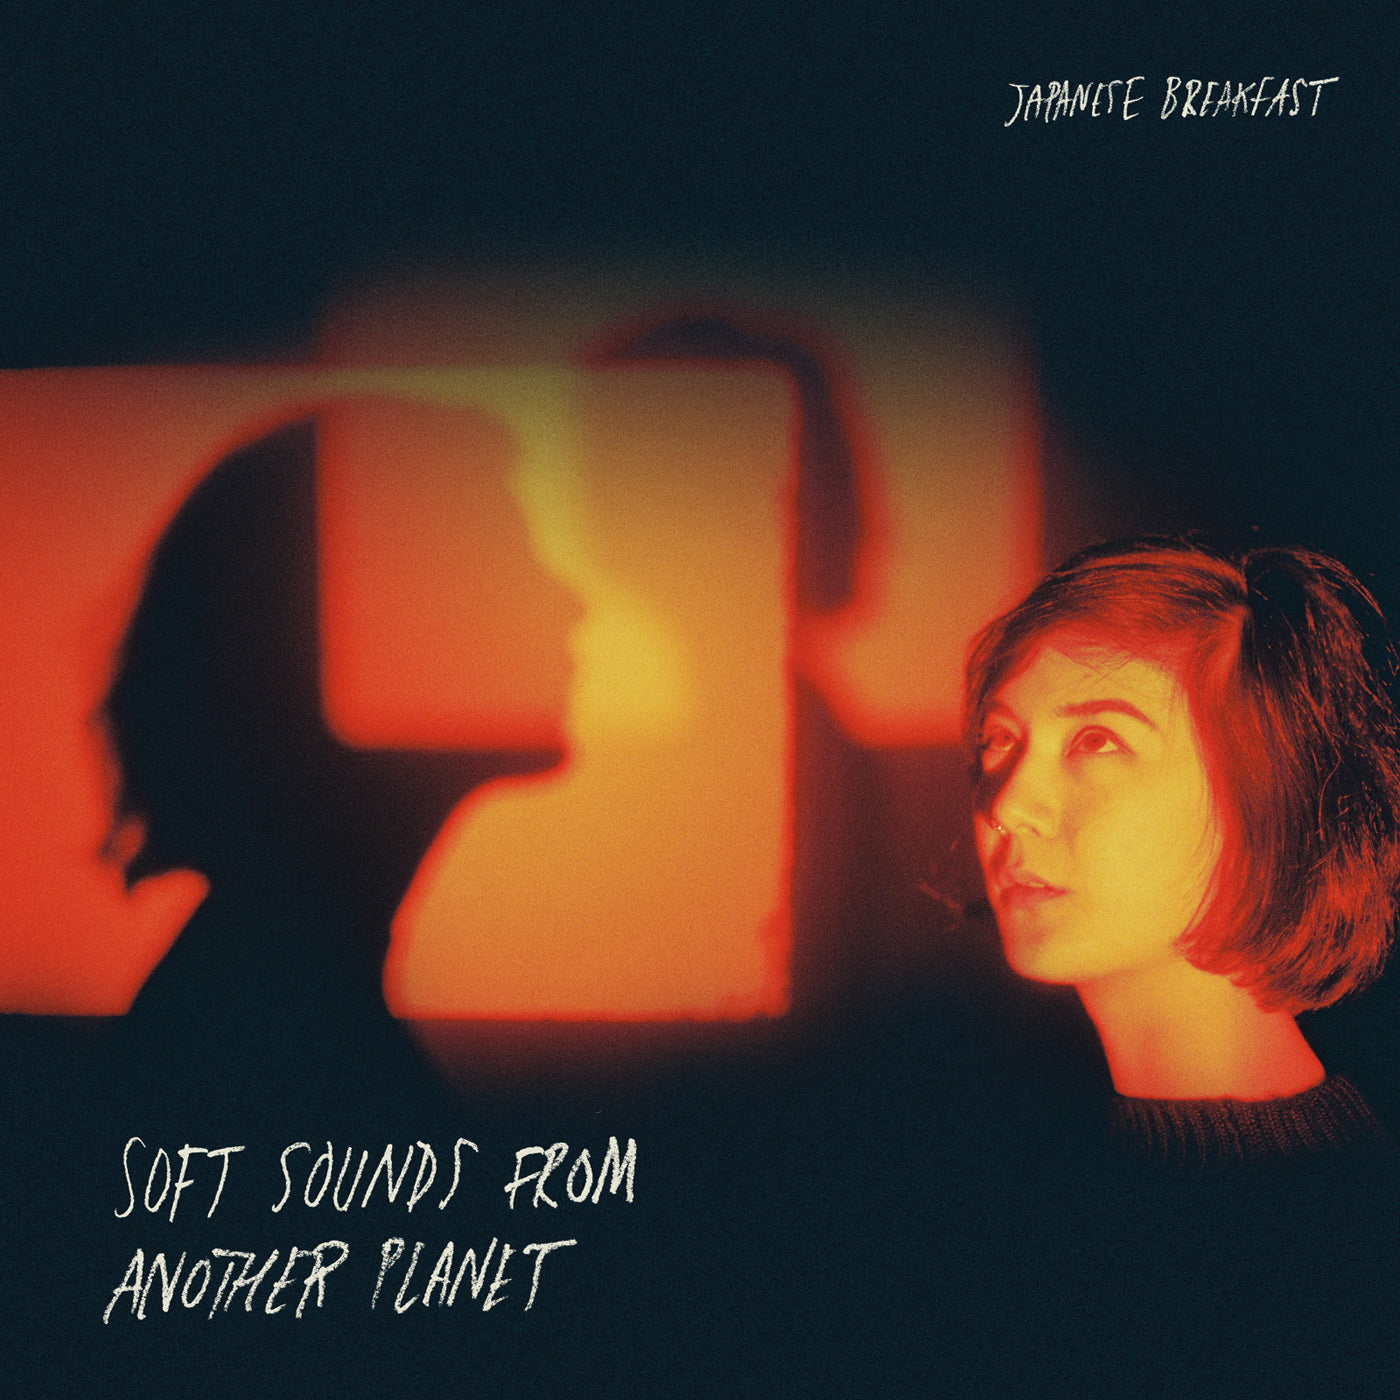 Japanese Breakfast - "Soft Sounds From Another Planet" Vinyl LP